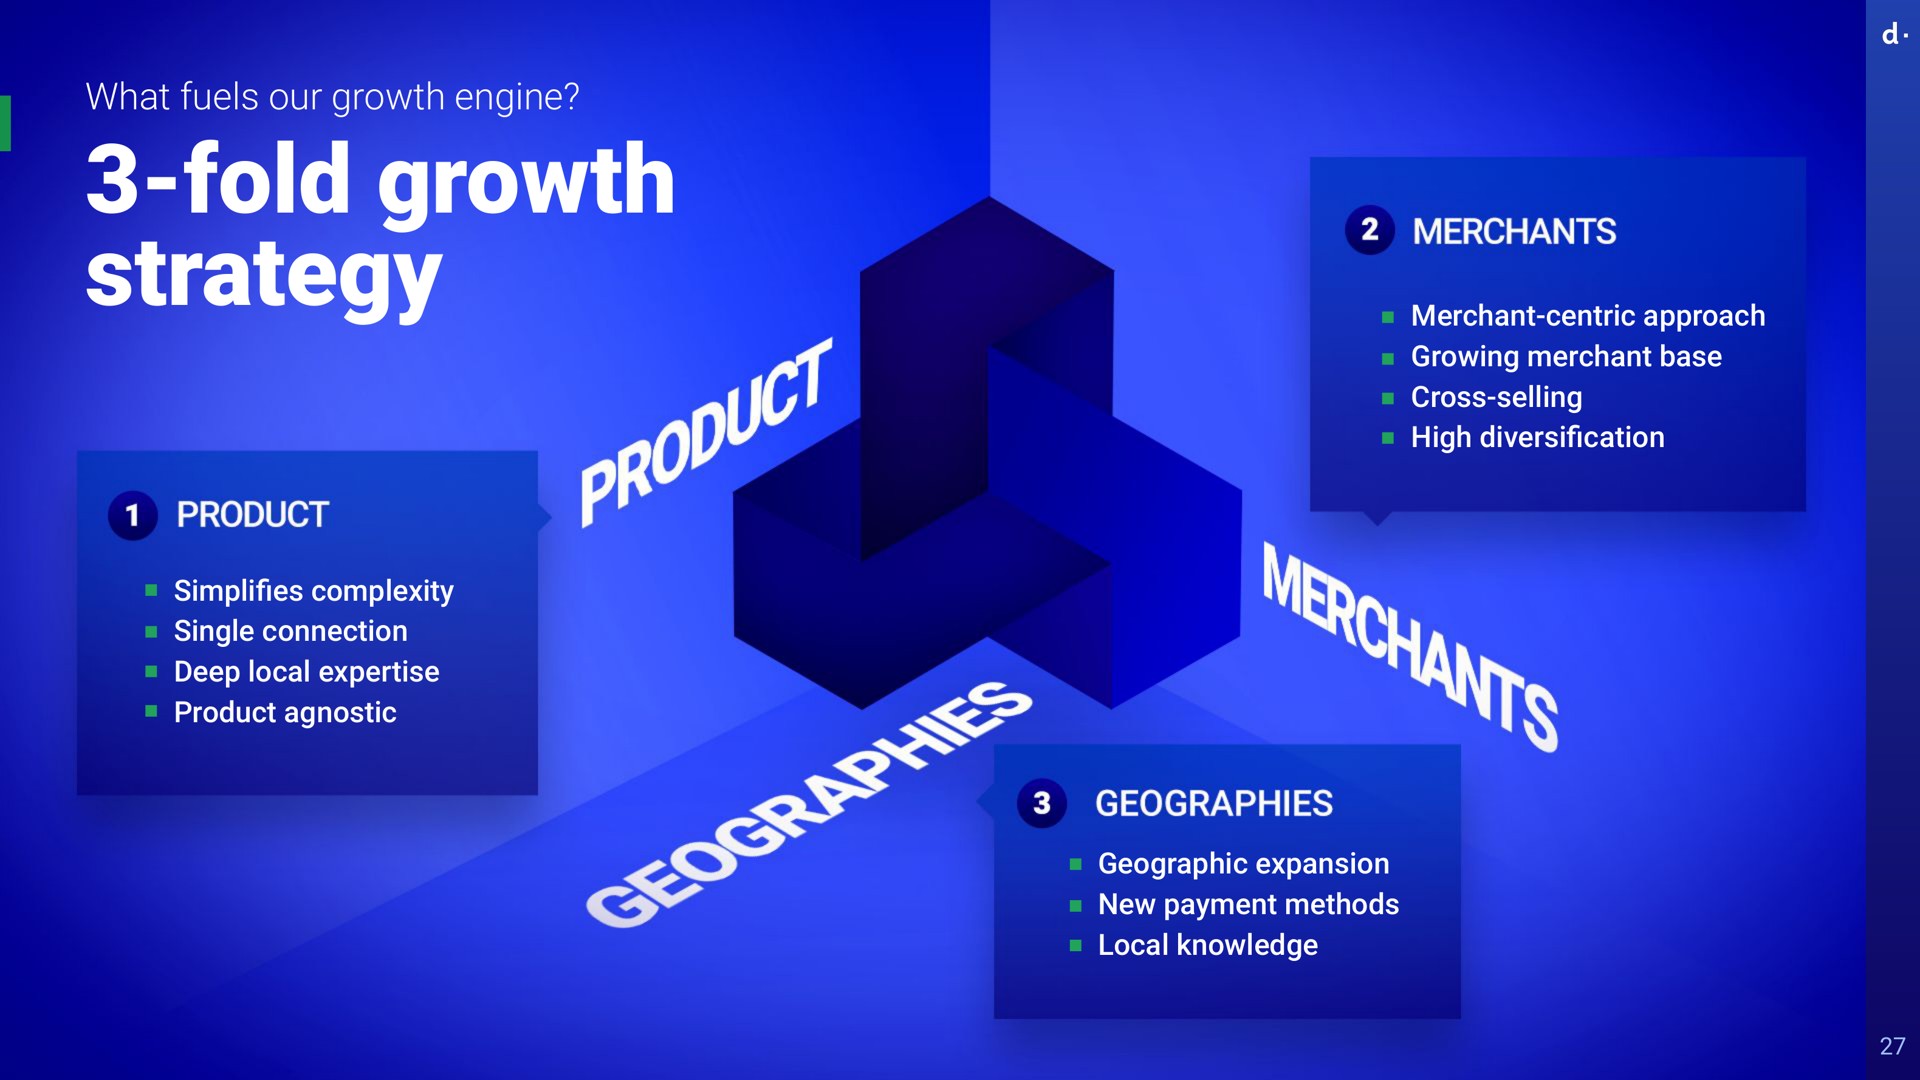 what fuels our growth engine fold growth strategy complexity single connection deep local product agnostic merchant centric approach growing merchant base cross selling high cation geographic expansion new payment methods local knowledge simplifies merchants diversification geographies | dLocal